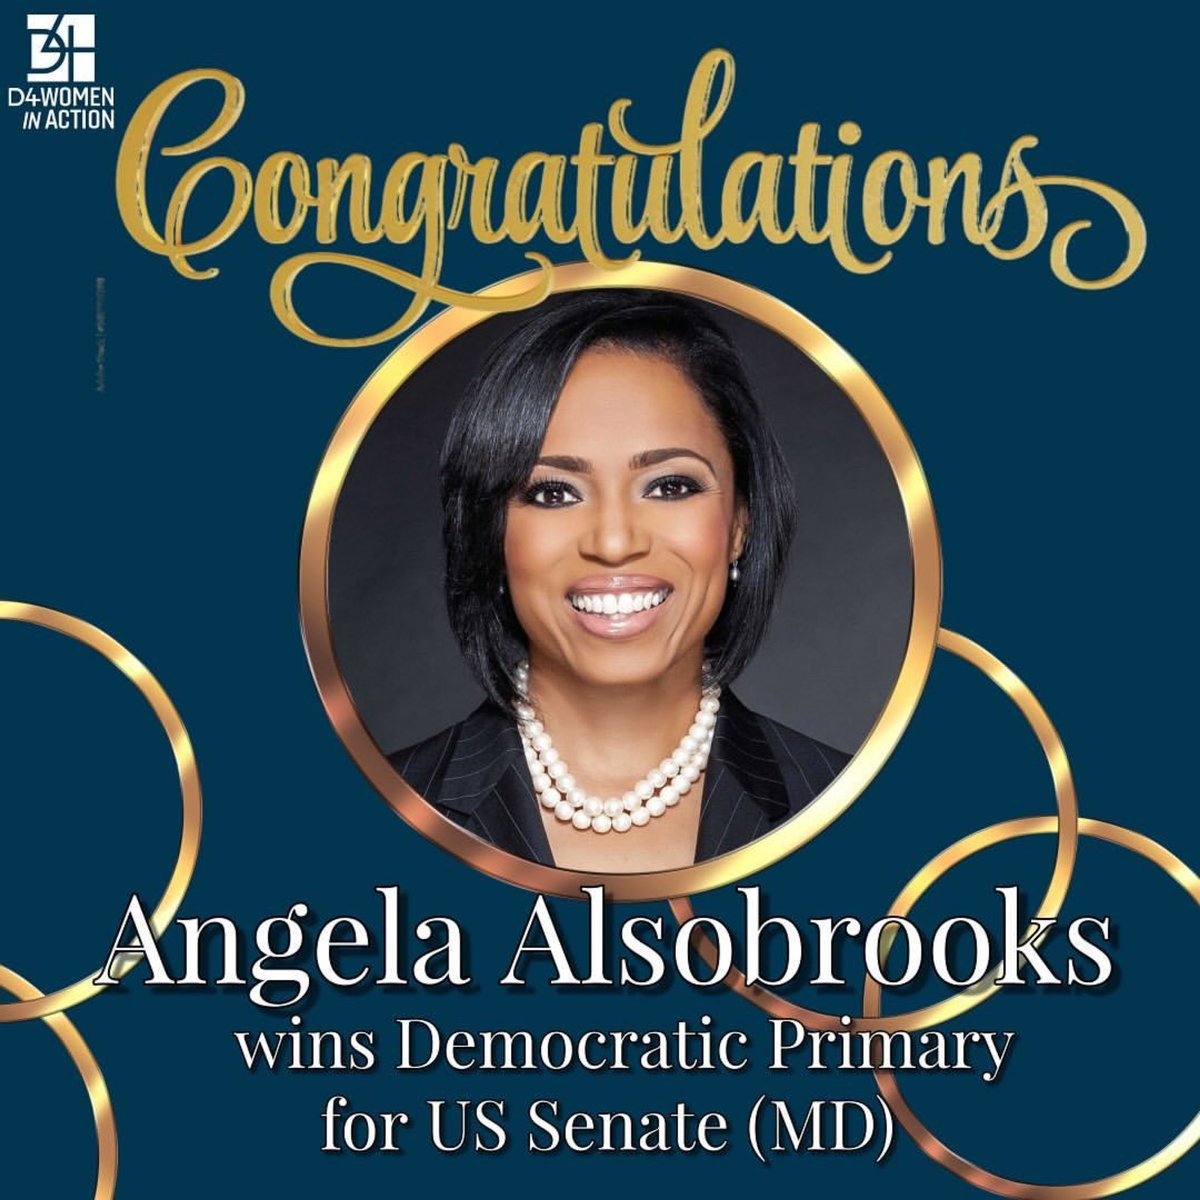 Congratulations Soror! #Repost @d4womeninaction
・・・
Congratulations to D4 Endorsed Candidate, Angela Alsobrooks, on her Democratic Primary win! #D4WomeninAction #AngelaAlsobrooks #USSenateMD #TheLegacyContinues